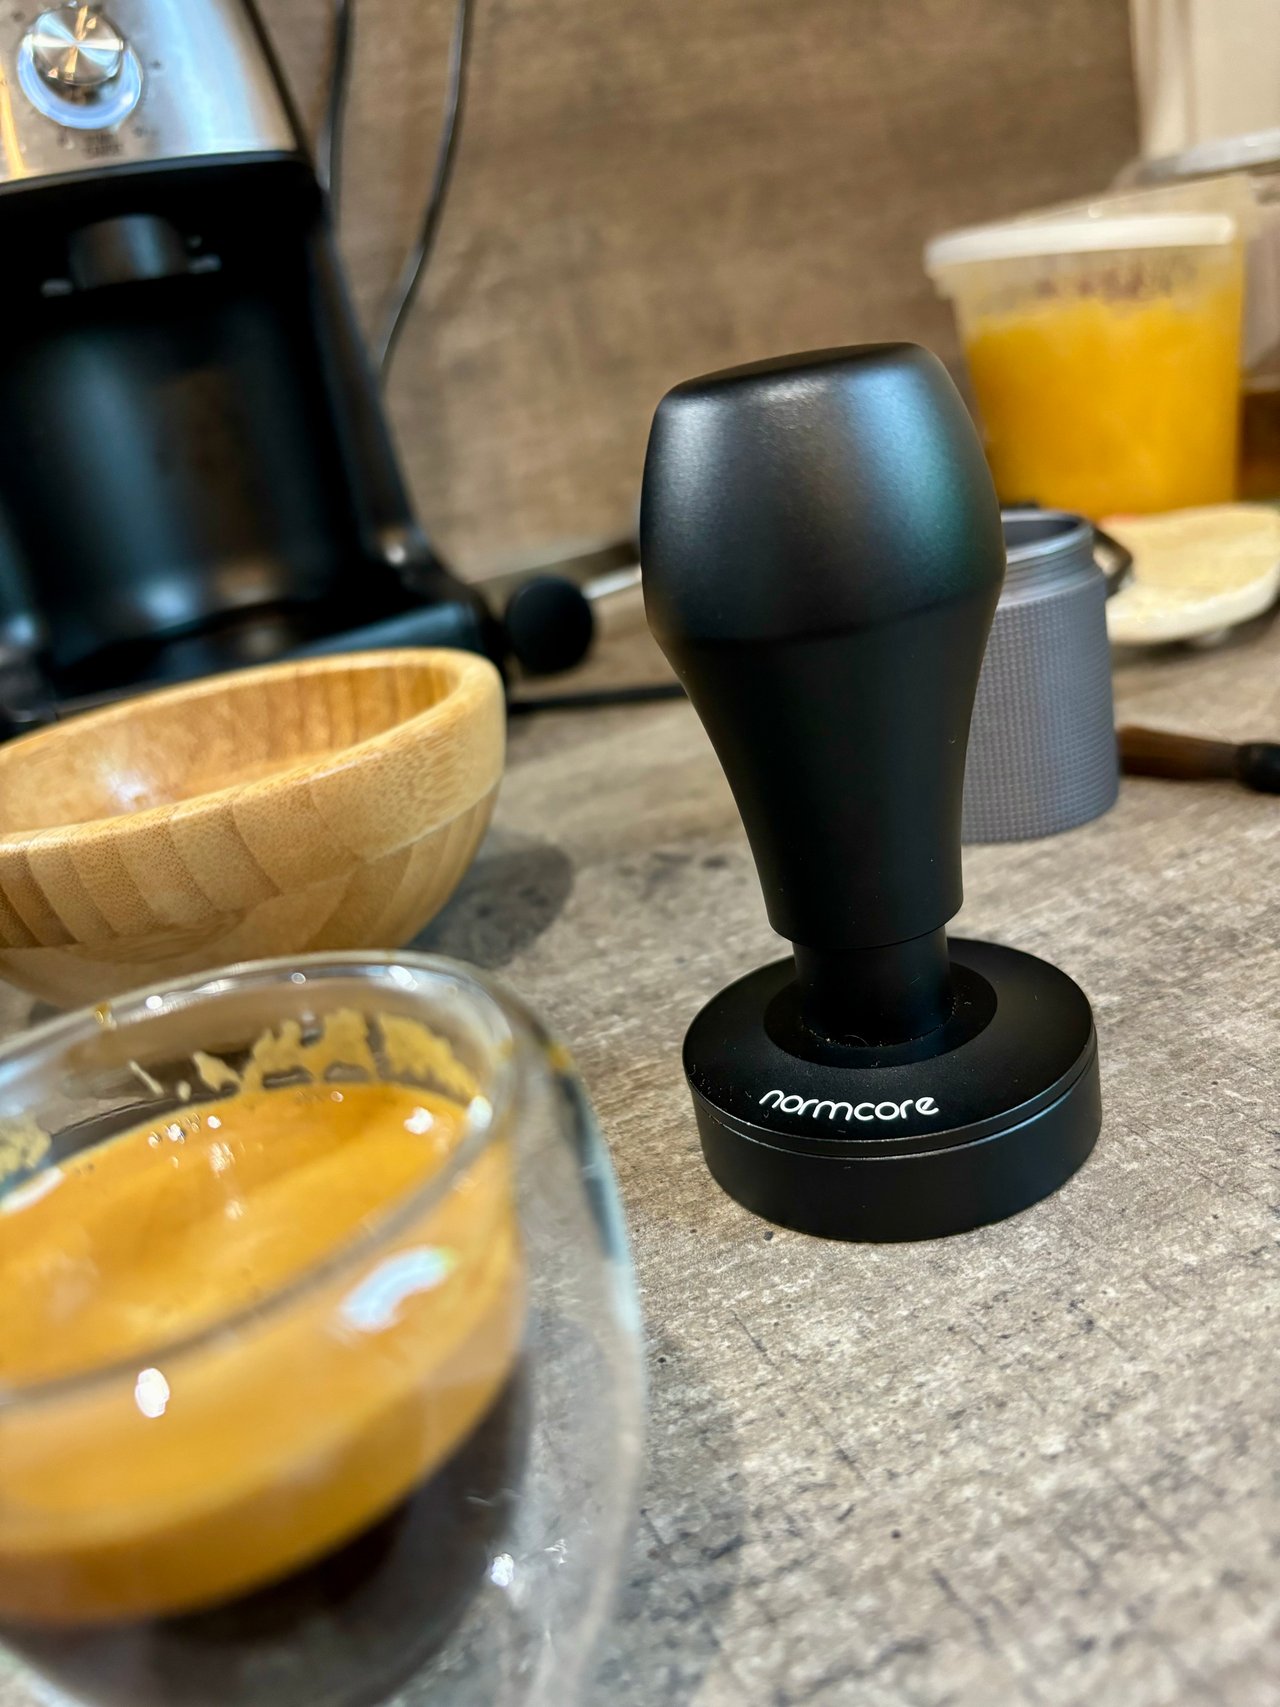 Enjoying my new espresso brewing gear with every sip of coffee. Normcore Tamper and dosing funnel.